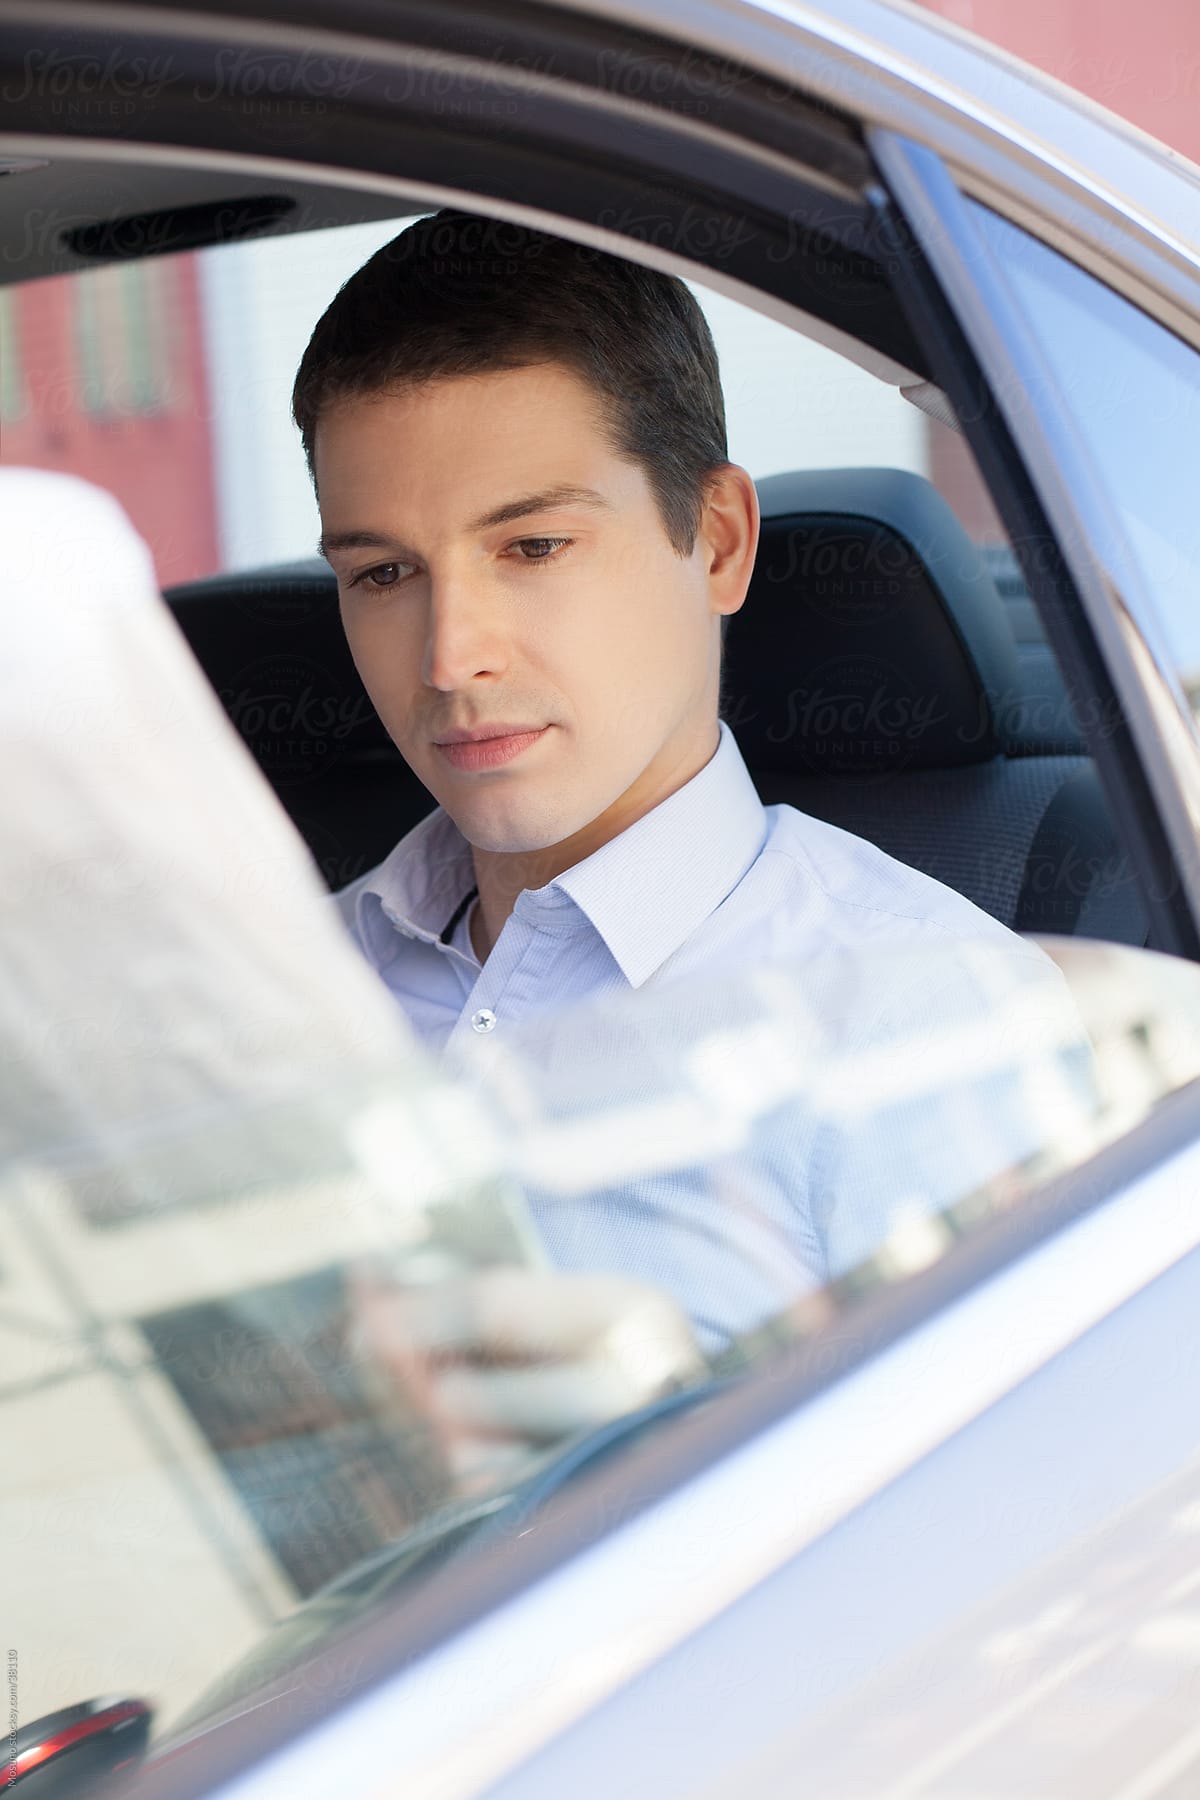 Businessman sitting in a backseat of the car and reading newspapers.